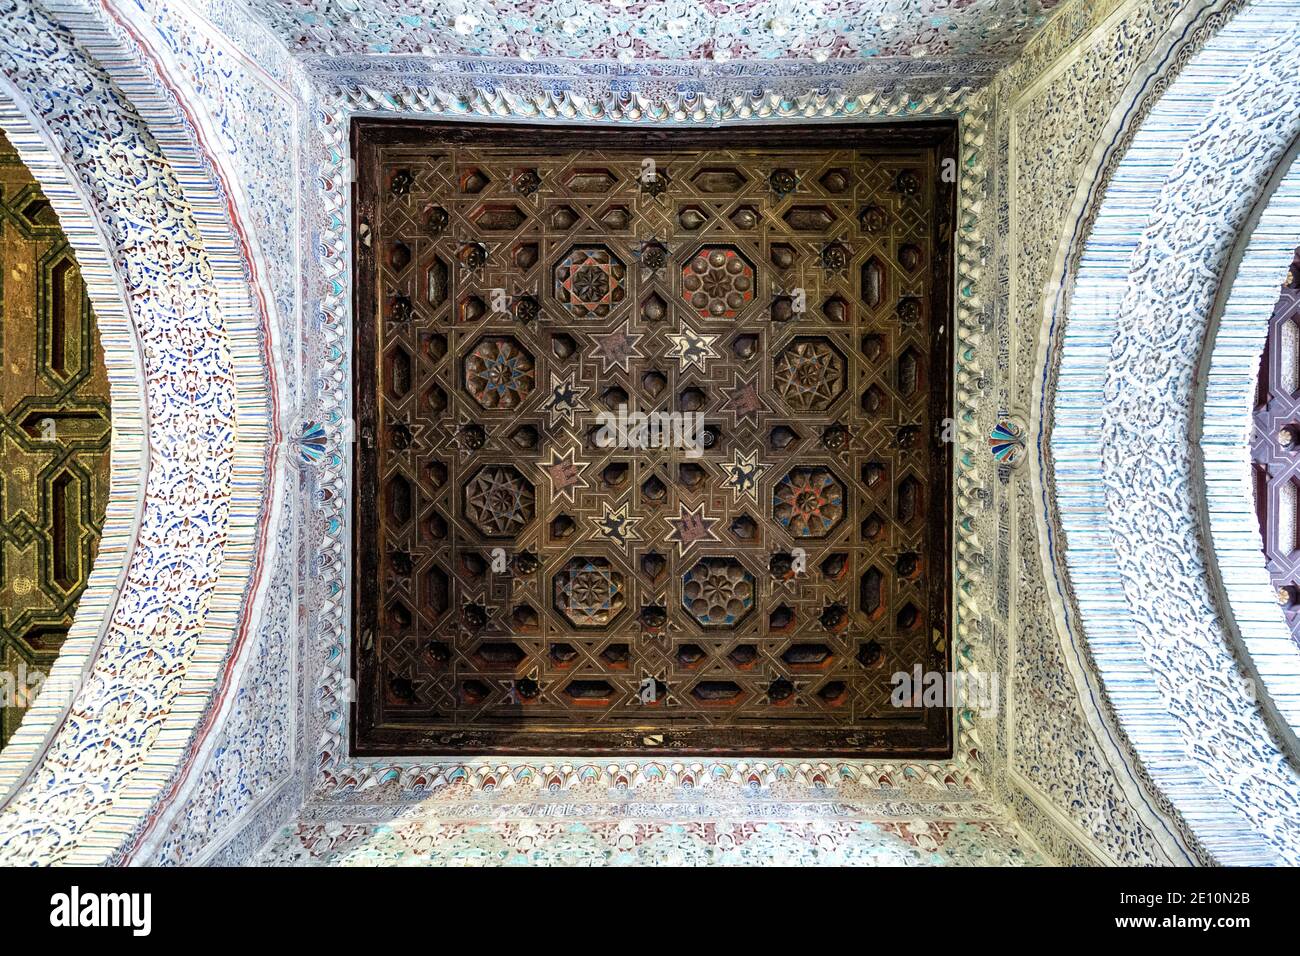 Ornate ceiling in Mudejar Moorish style in the entrance hall of Royal Alcázar of Seville, Andalusia, Spain Stock Photo